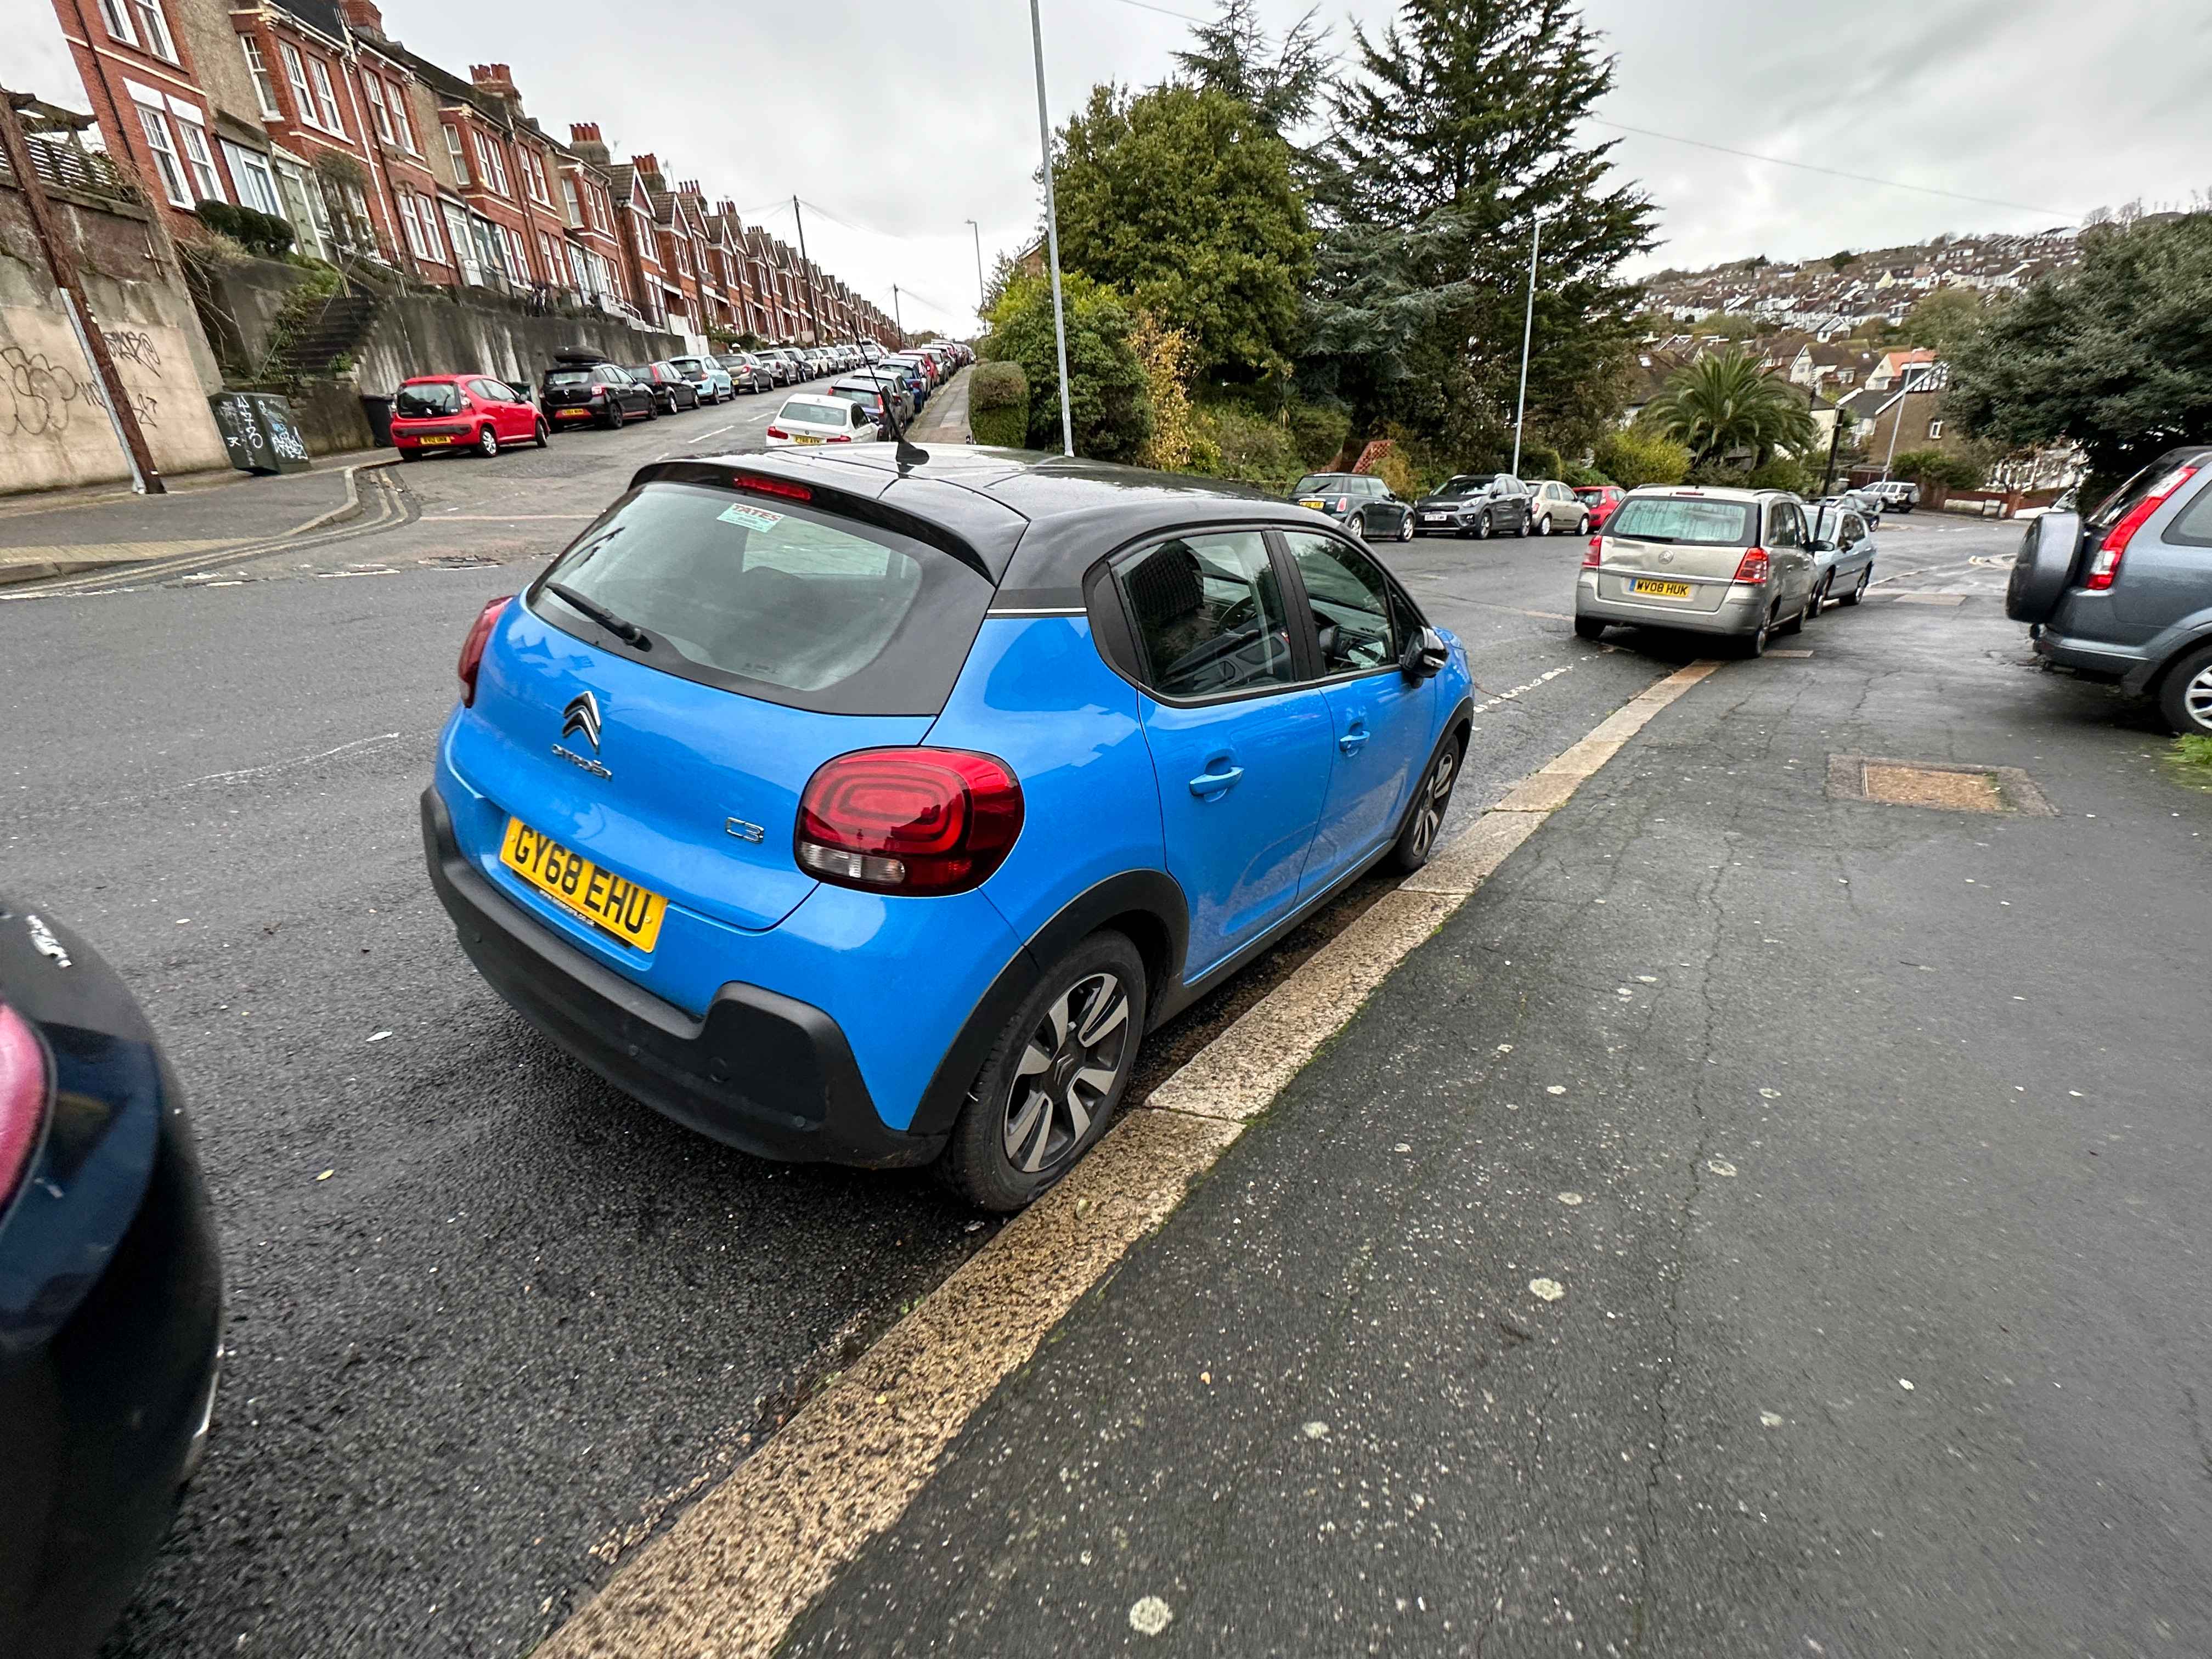 Photograph of GY68 EHU - a Blue Citroen C3 parked in Hollingdean by a non-resident who uses the local area as part of their Brighton commute. The eighth of twelve photographs supplied by the residents of Hollingdean.